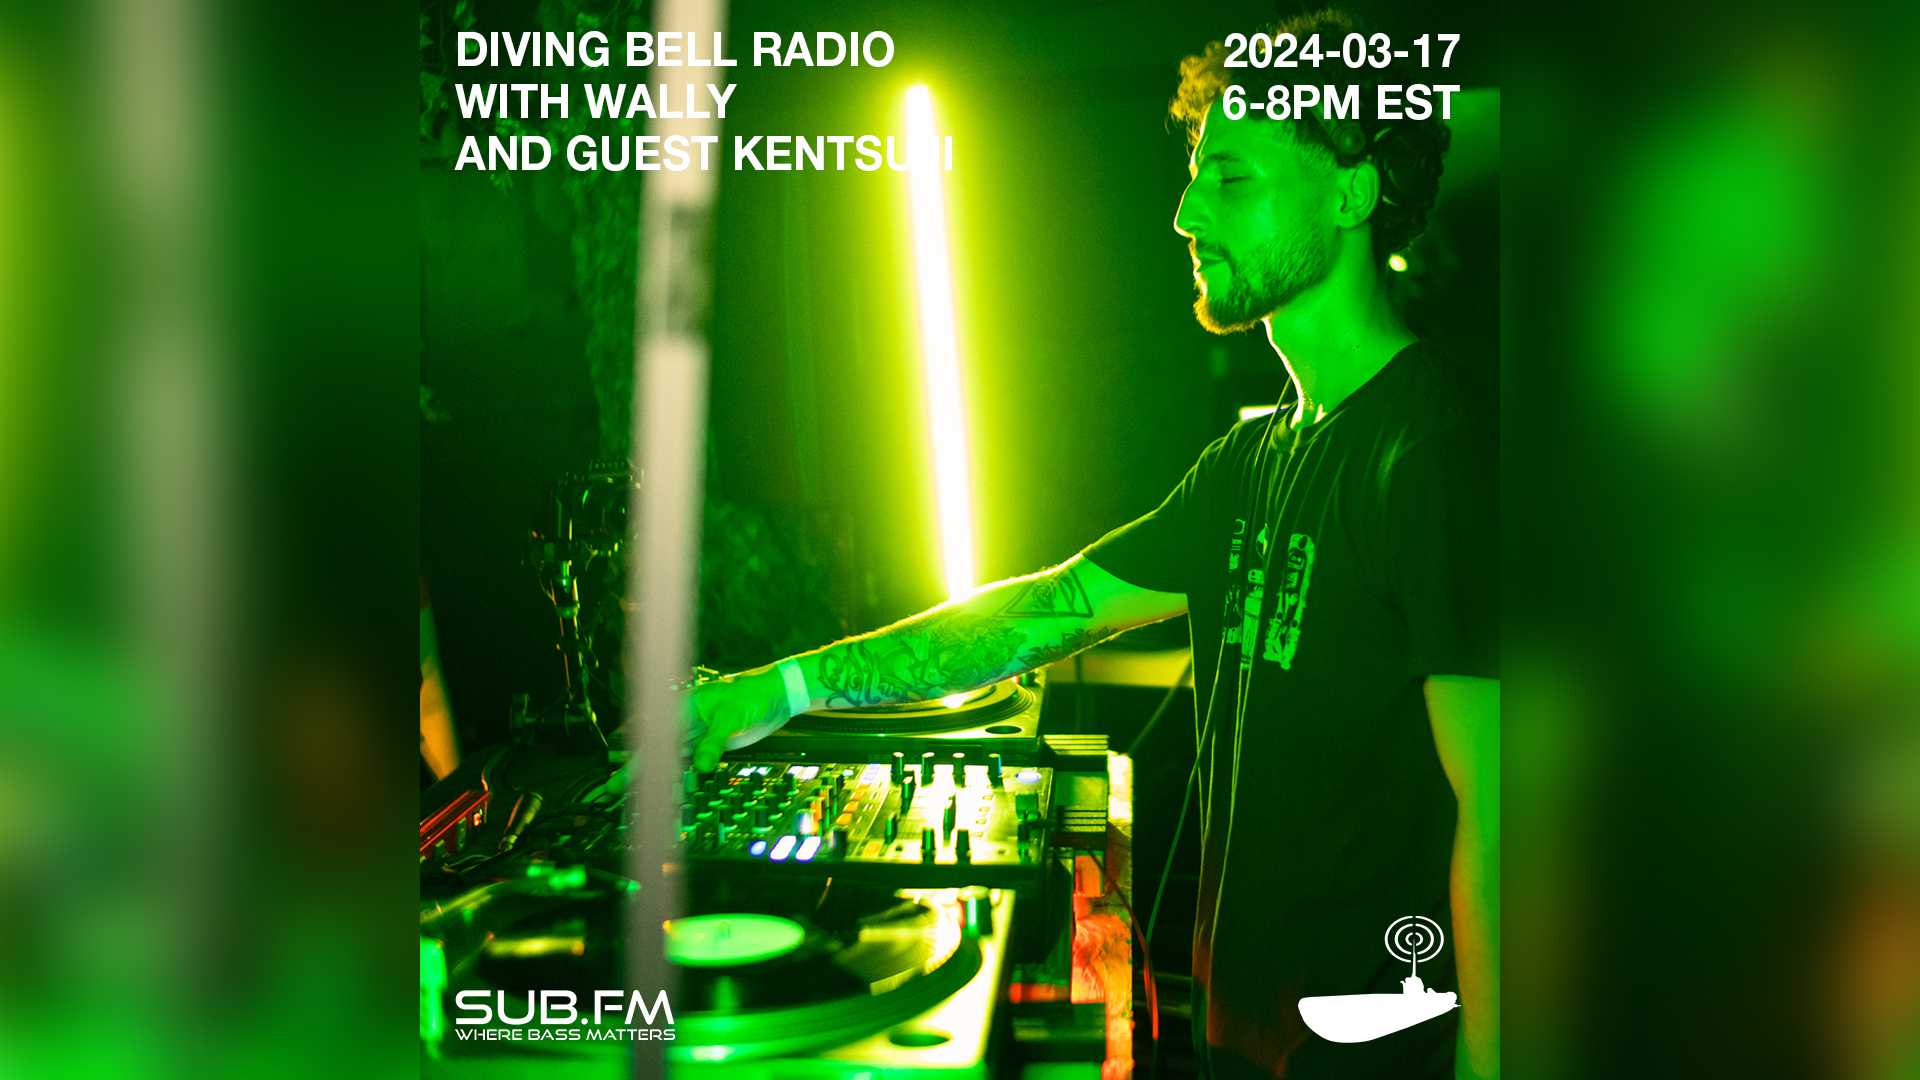 2024-03-17 – Diving bell radio with Guest Kentsuji